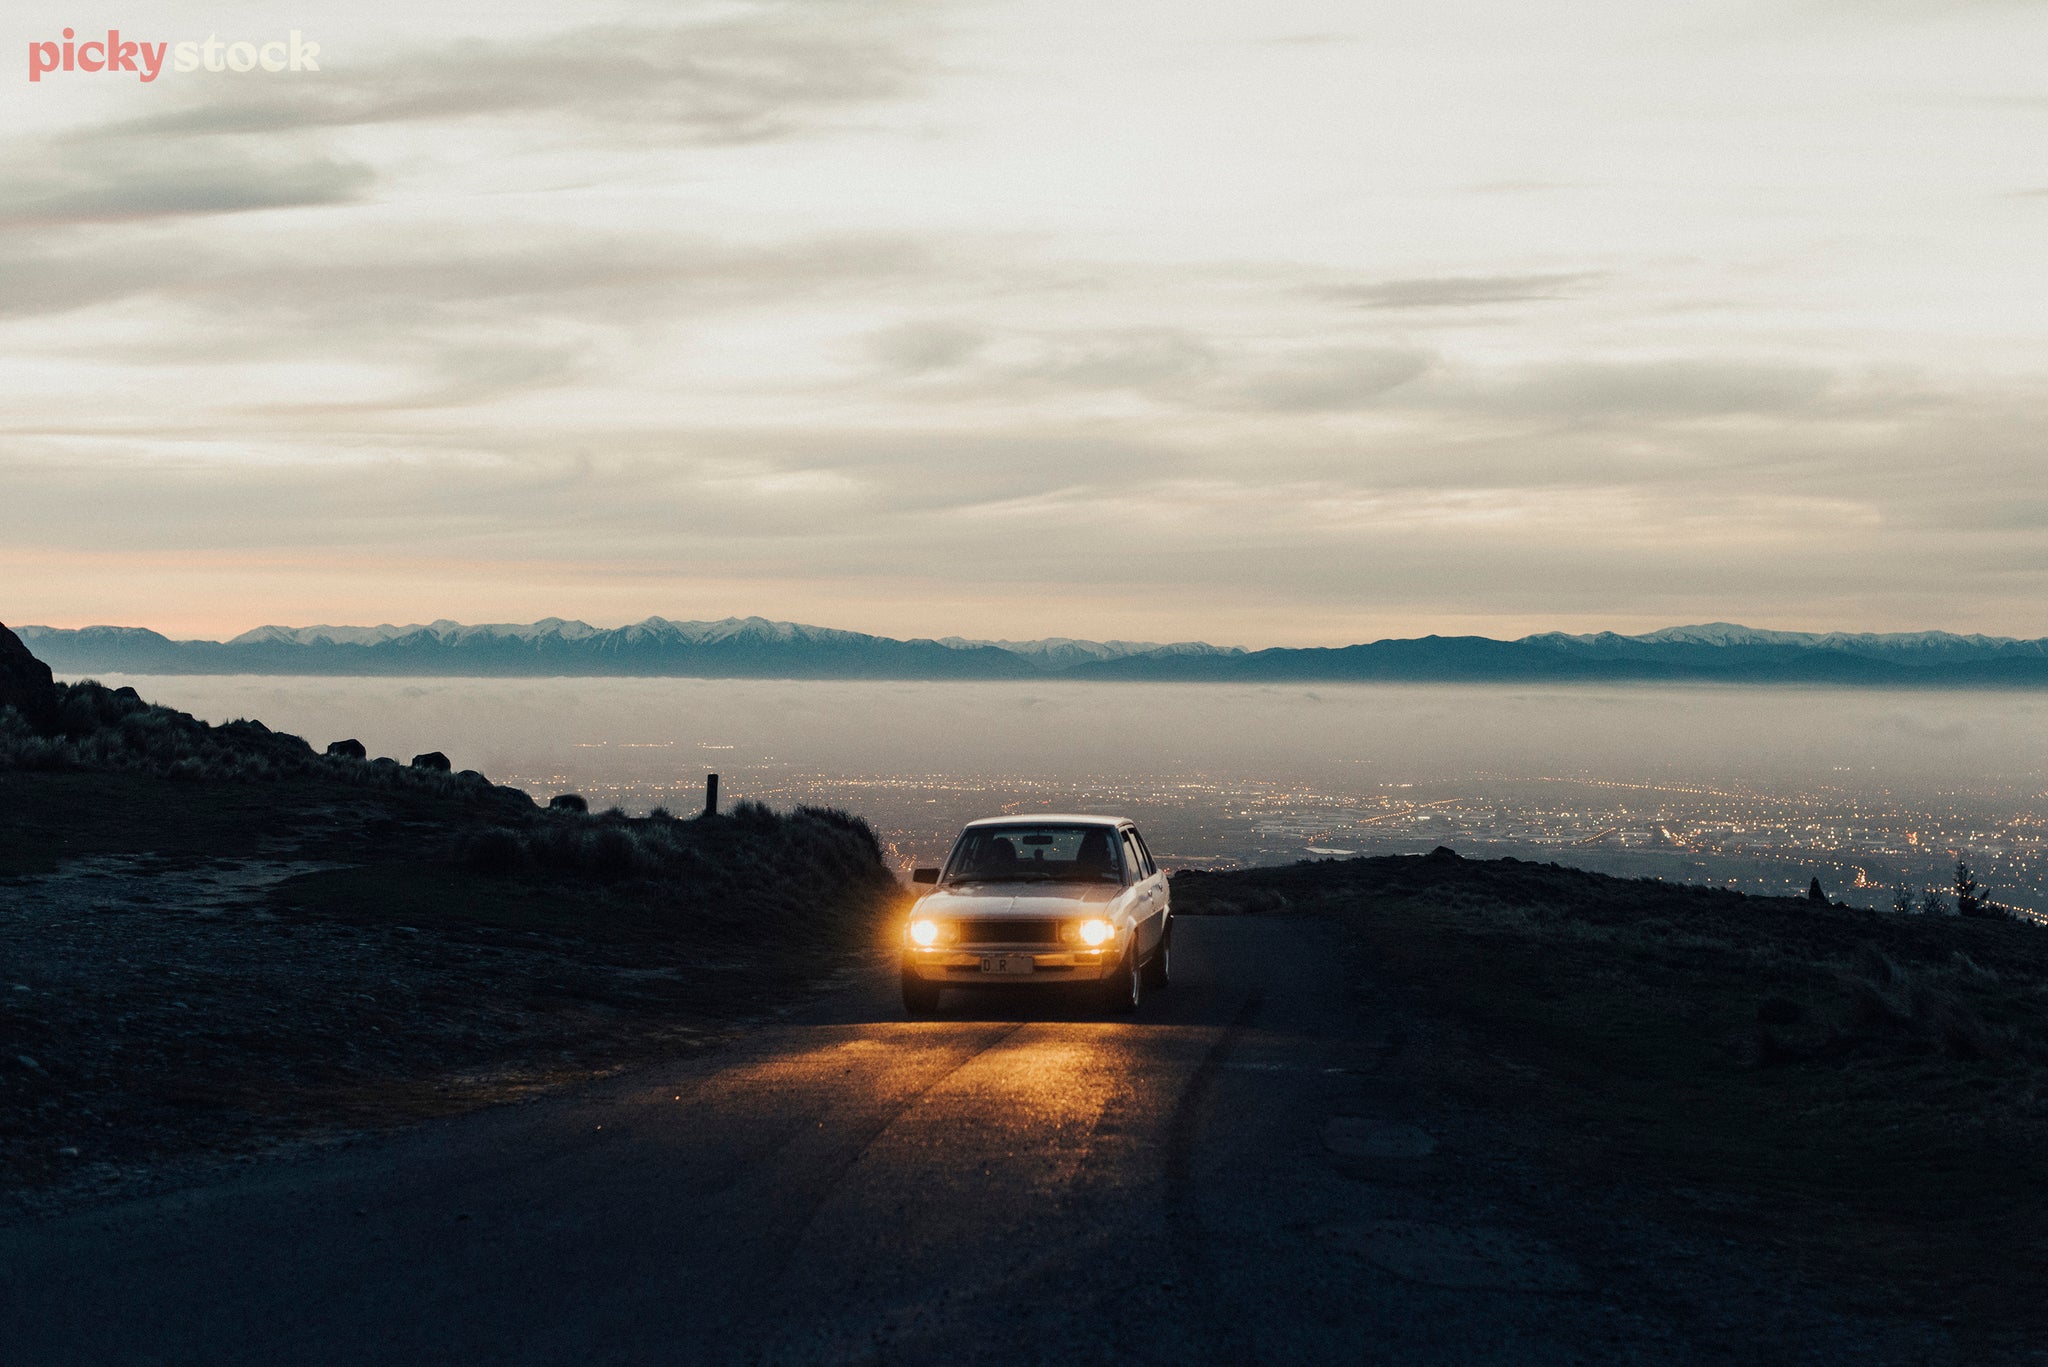 Car with lights on drives towards the camera, in the distance snowy mountains cut the horizon through the white cloudy sky.